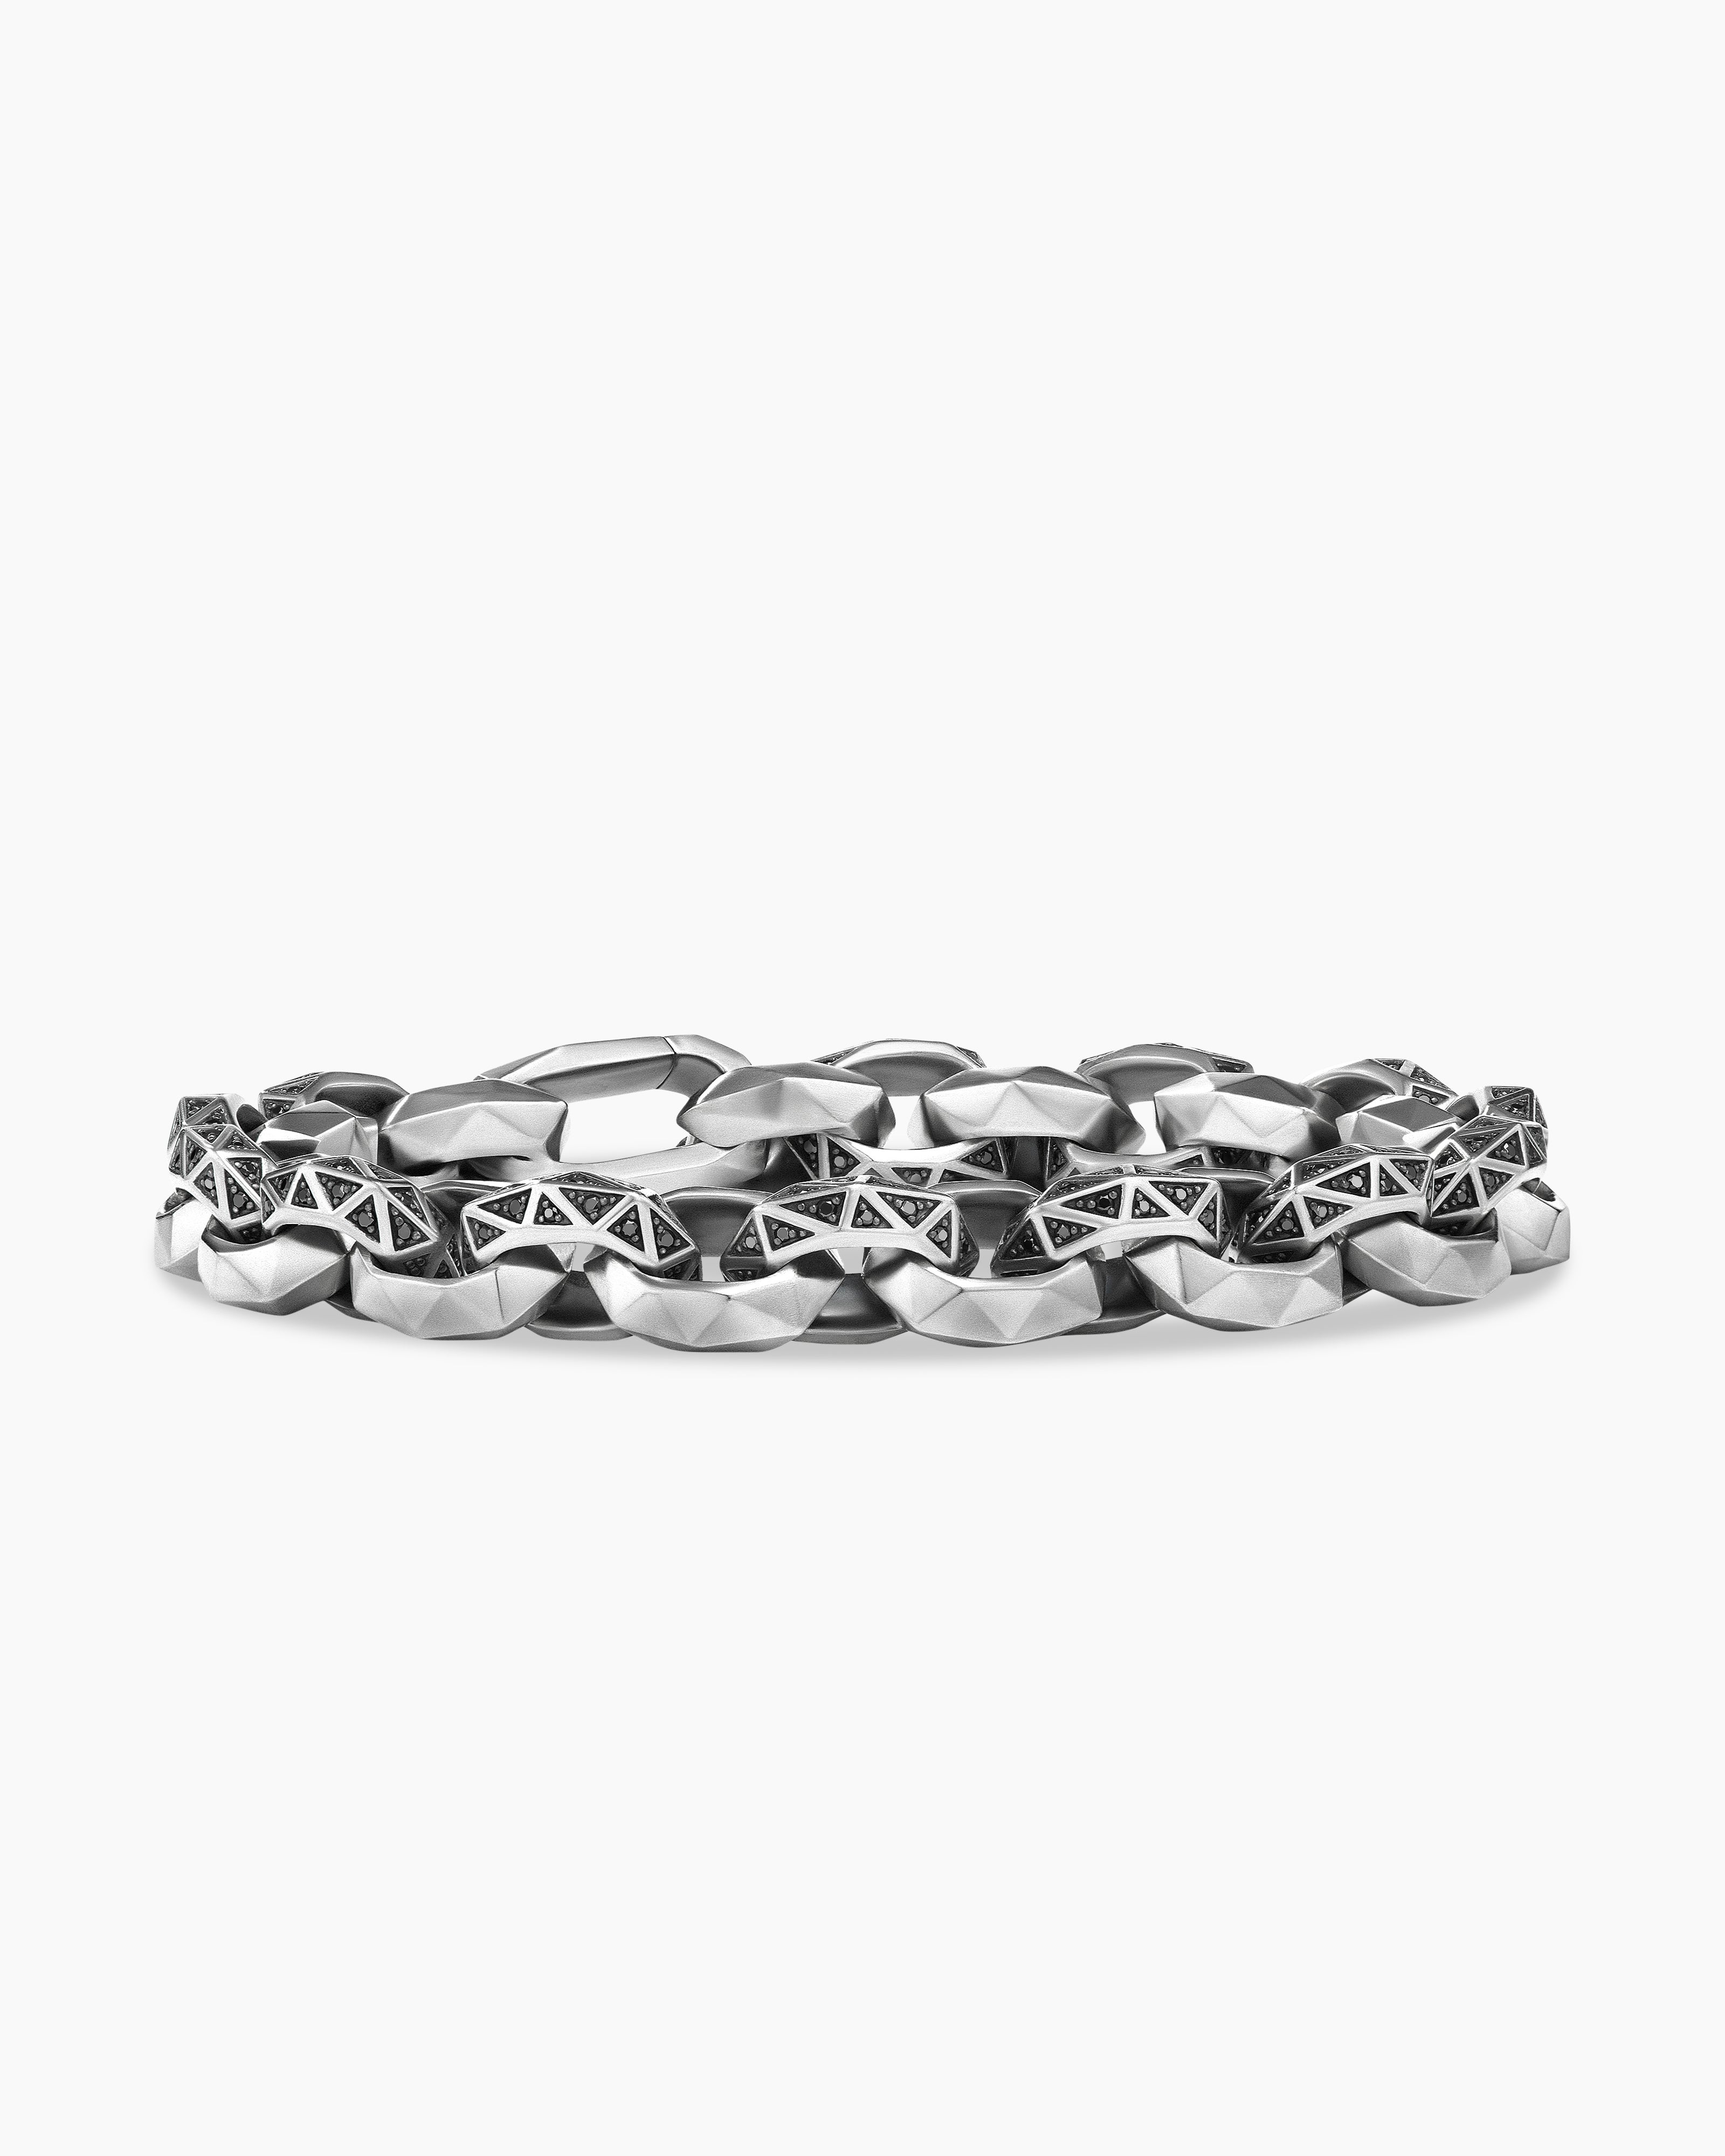 Exquisite 925 Sterling Silver Chanel Bracelet with Brilliant White